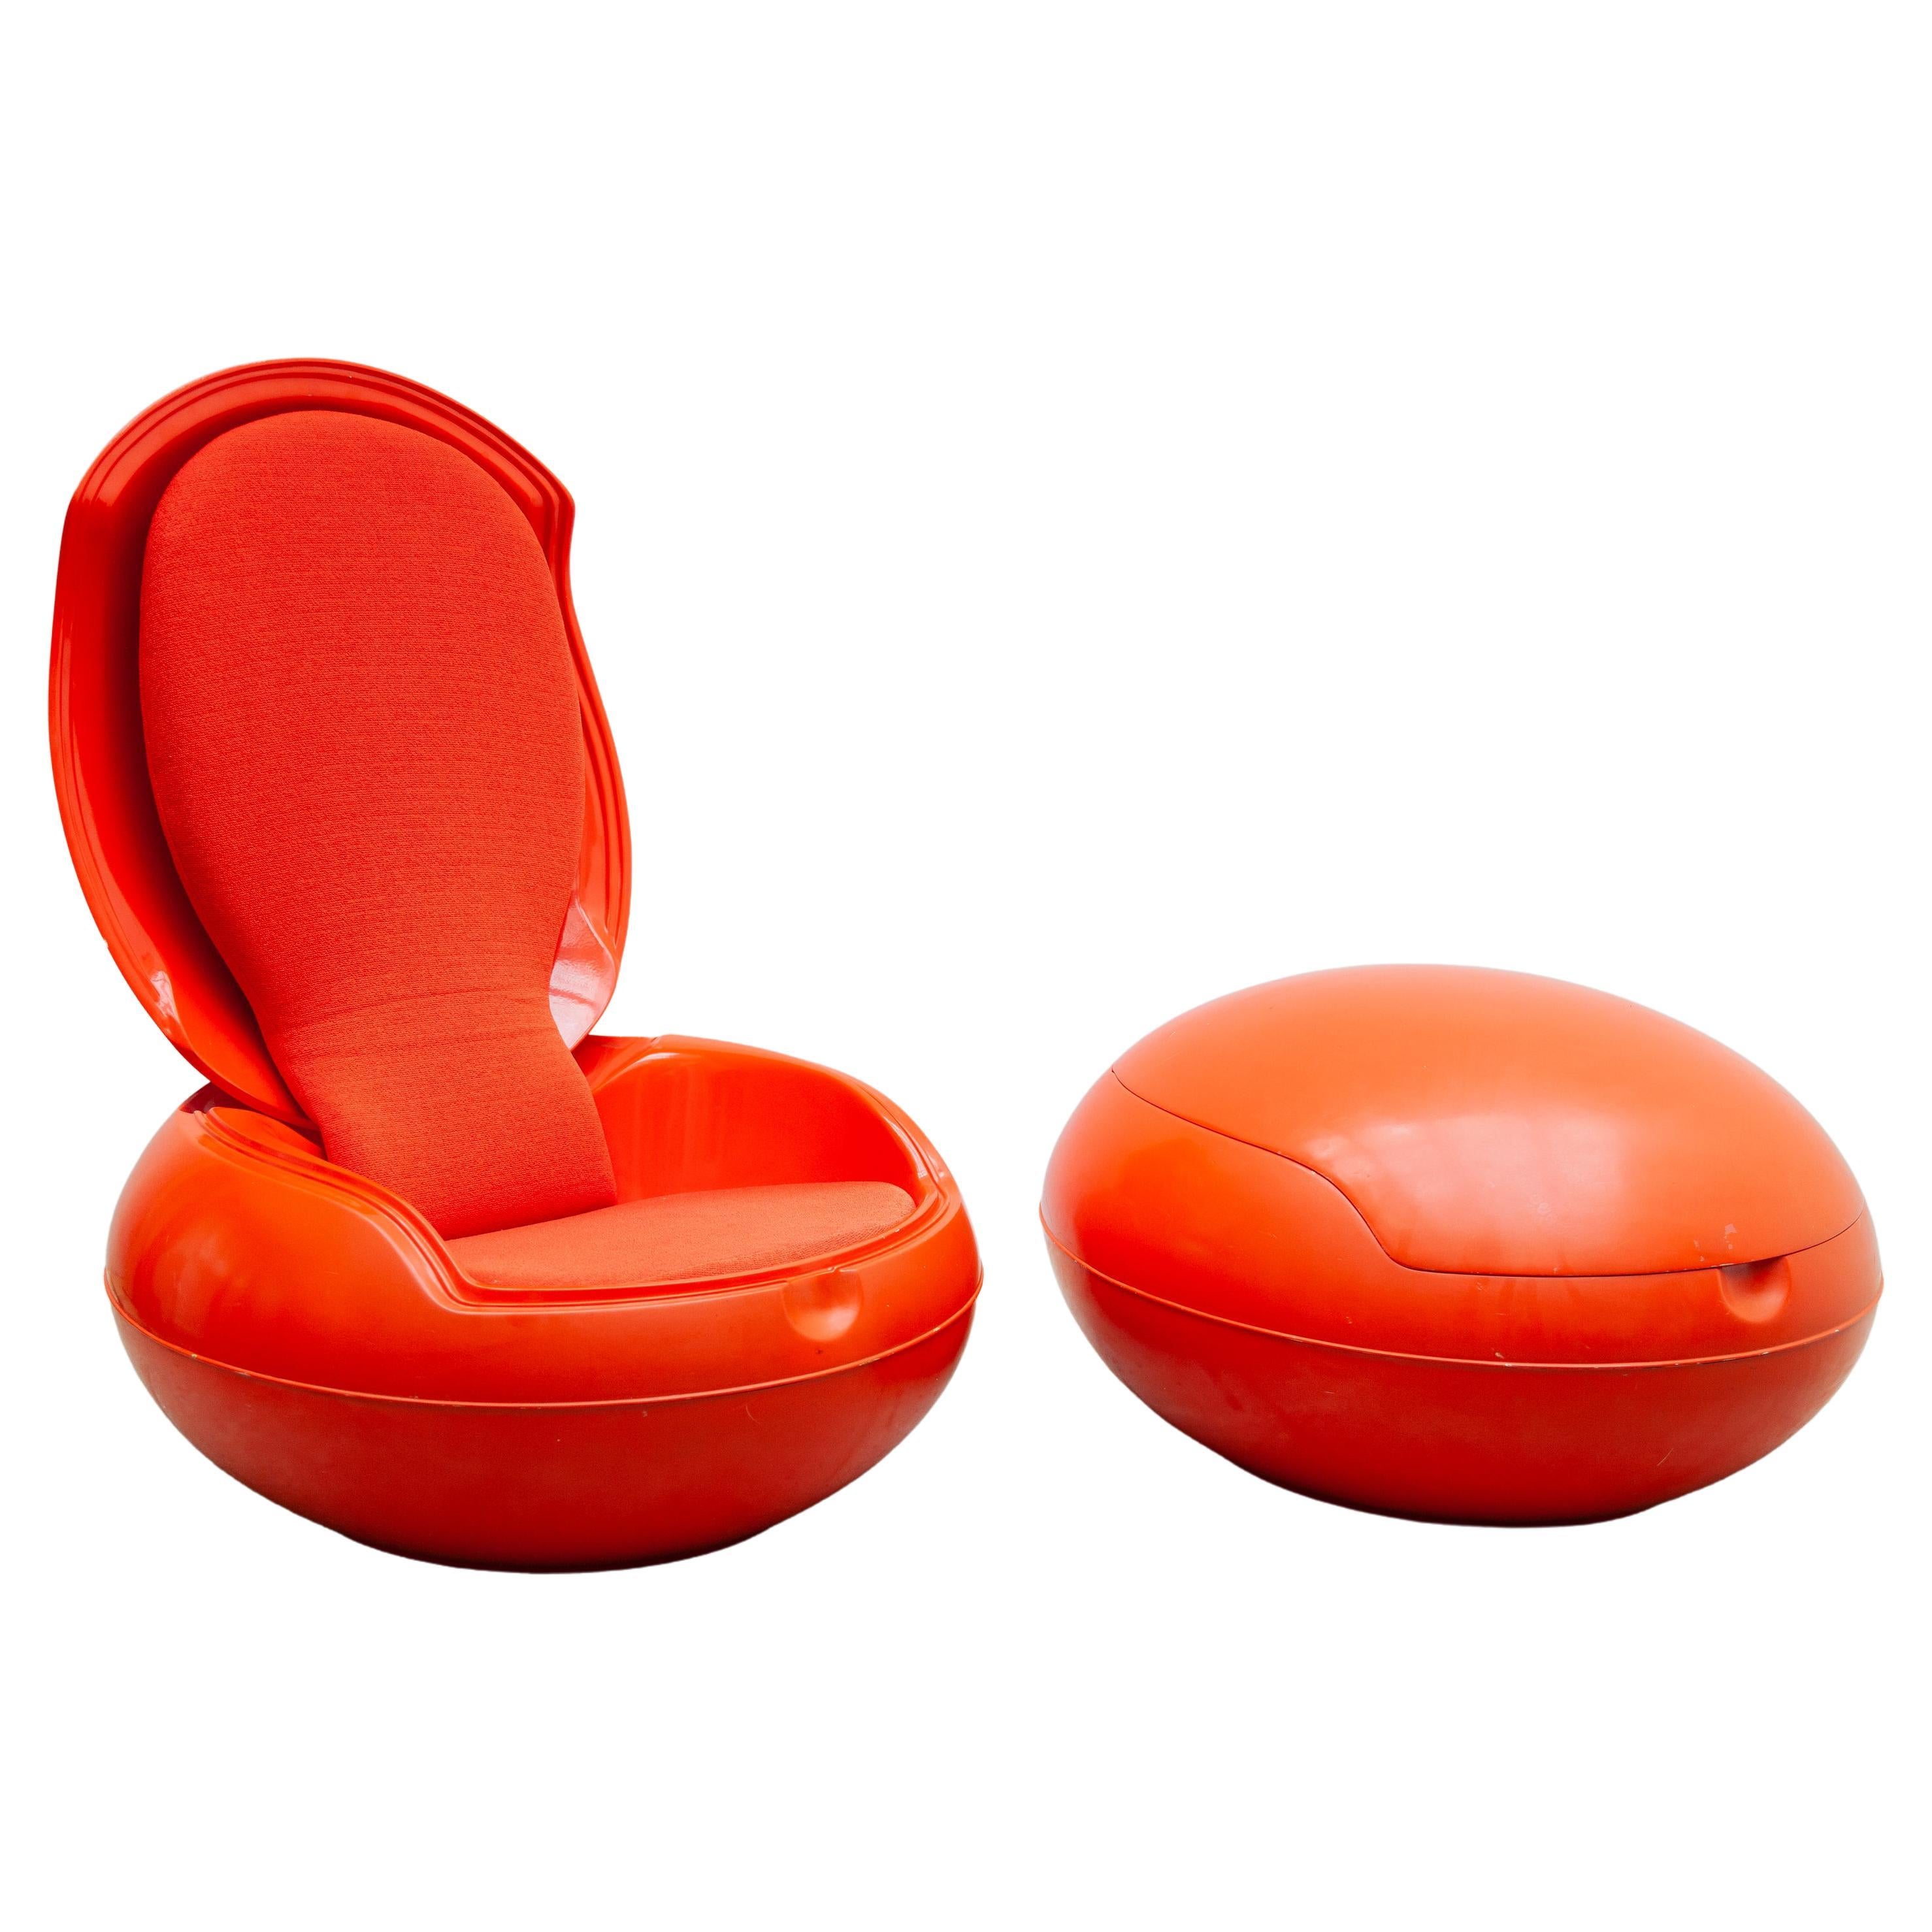 What are egg shaped chairs called?